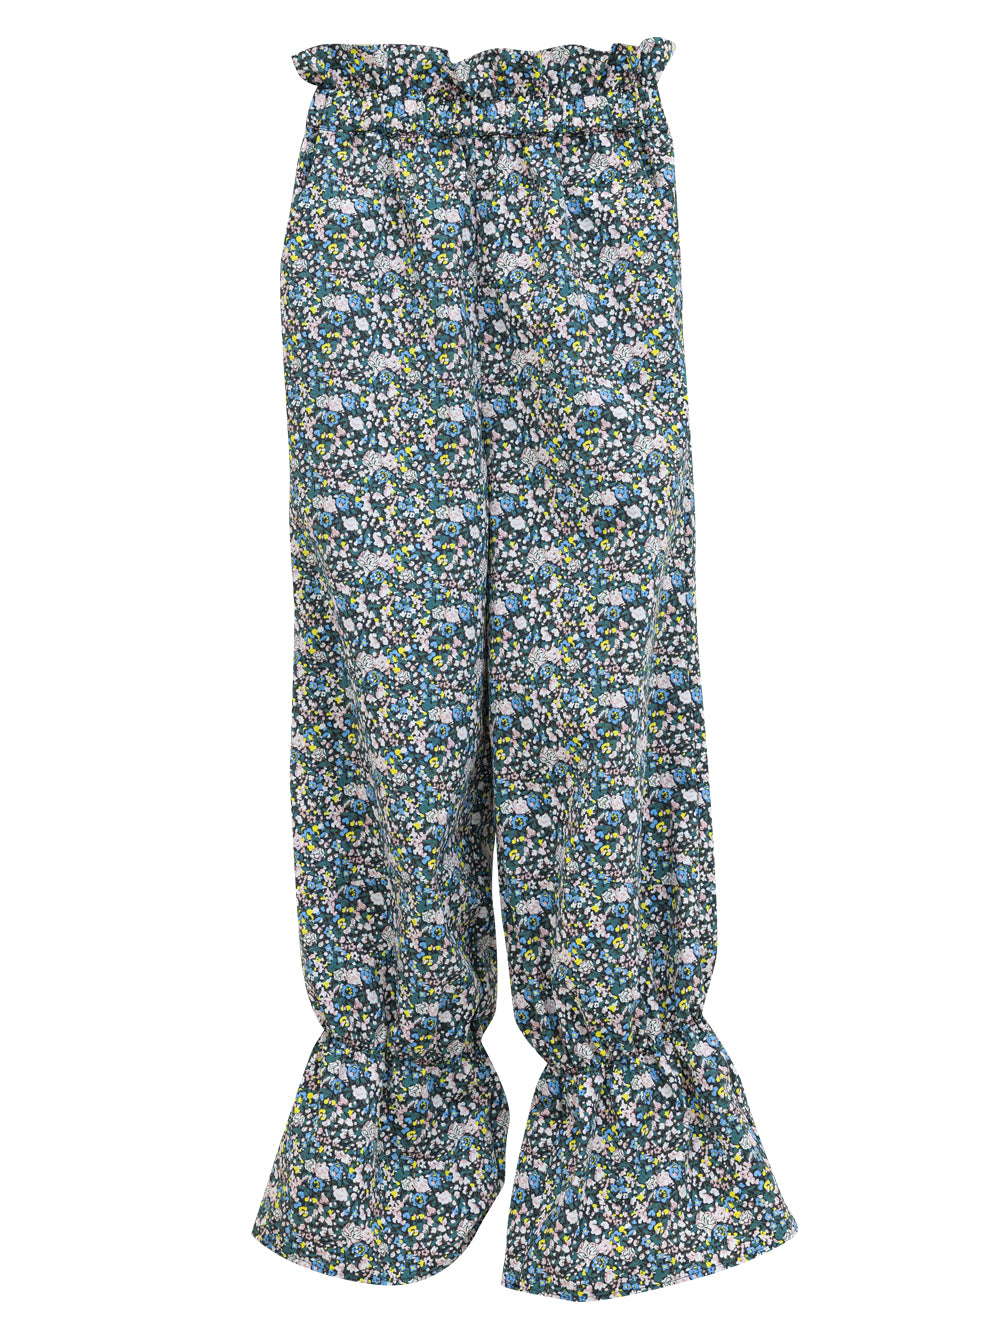 Black Floral Pattern Trousers